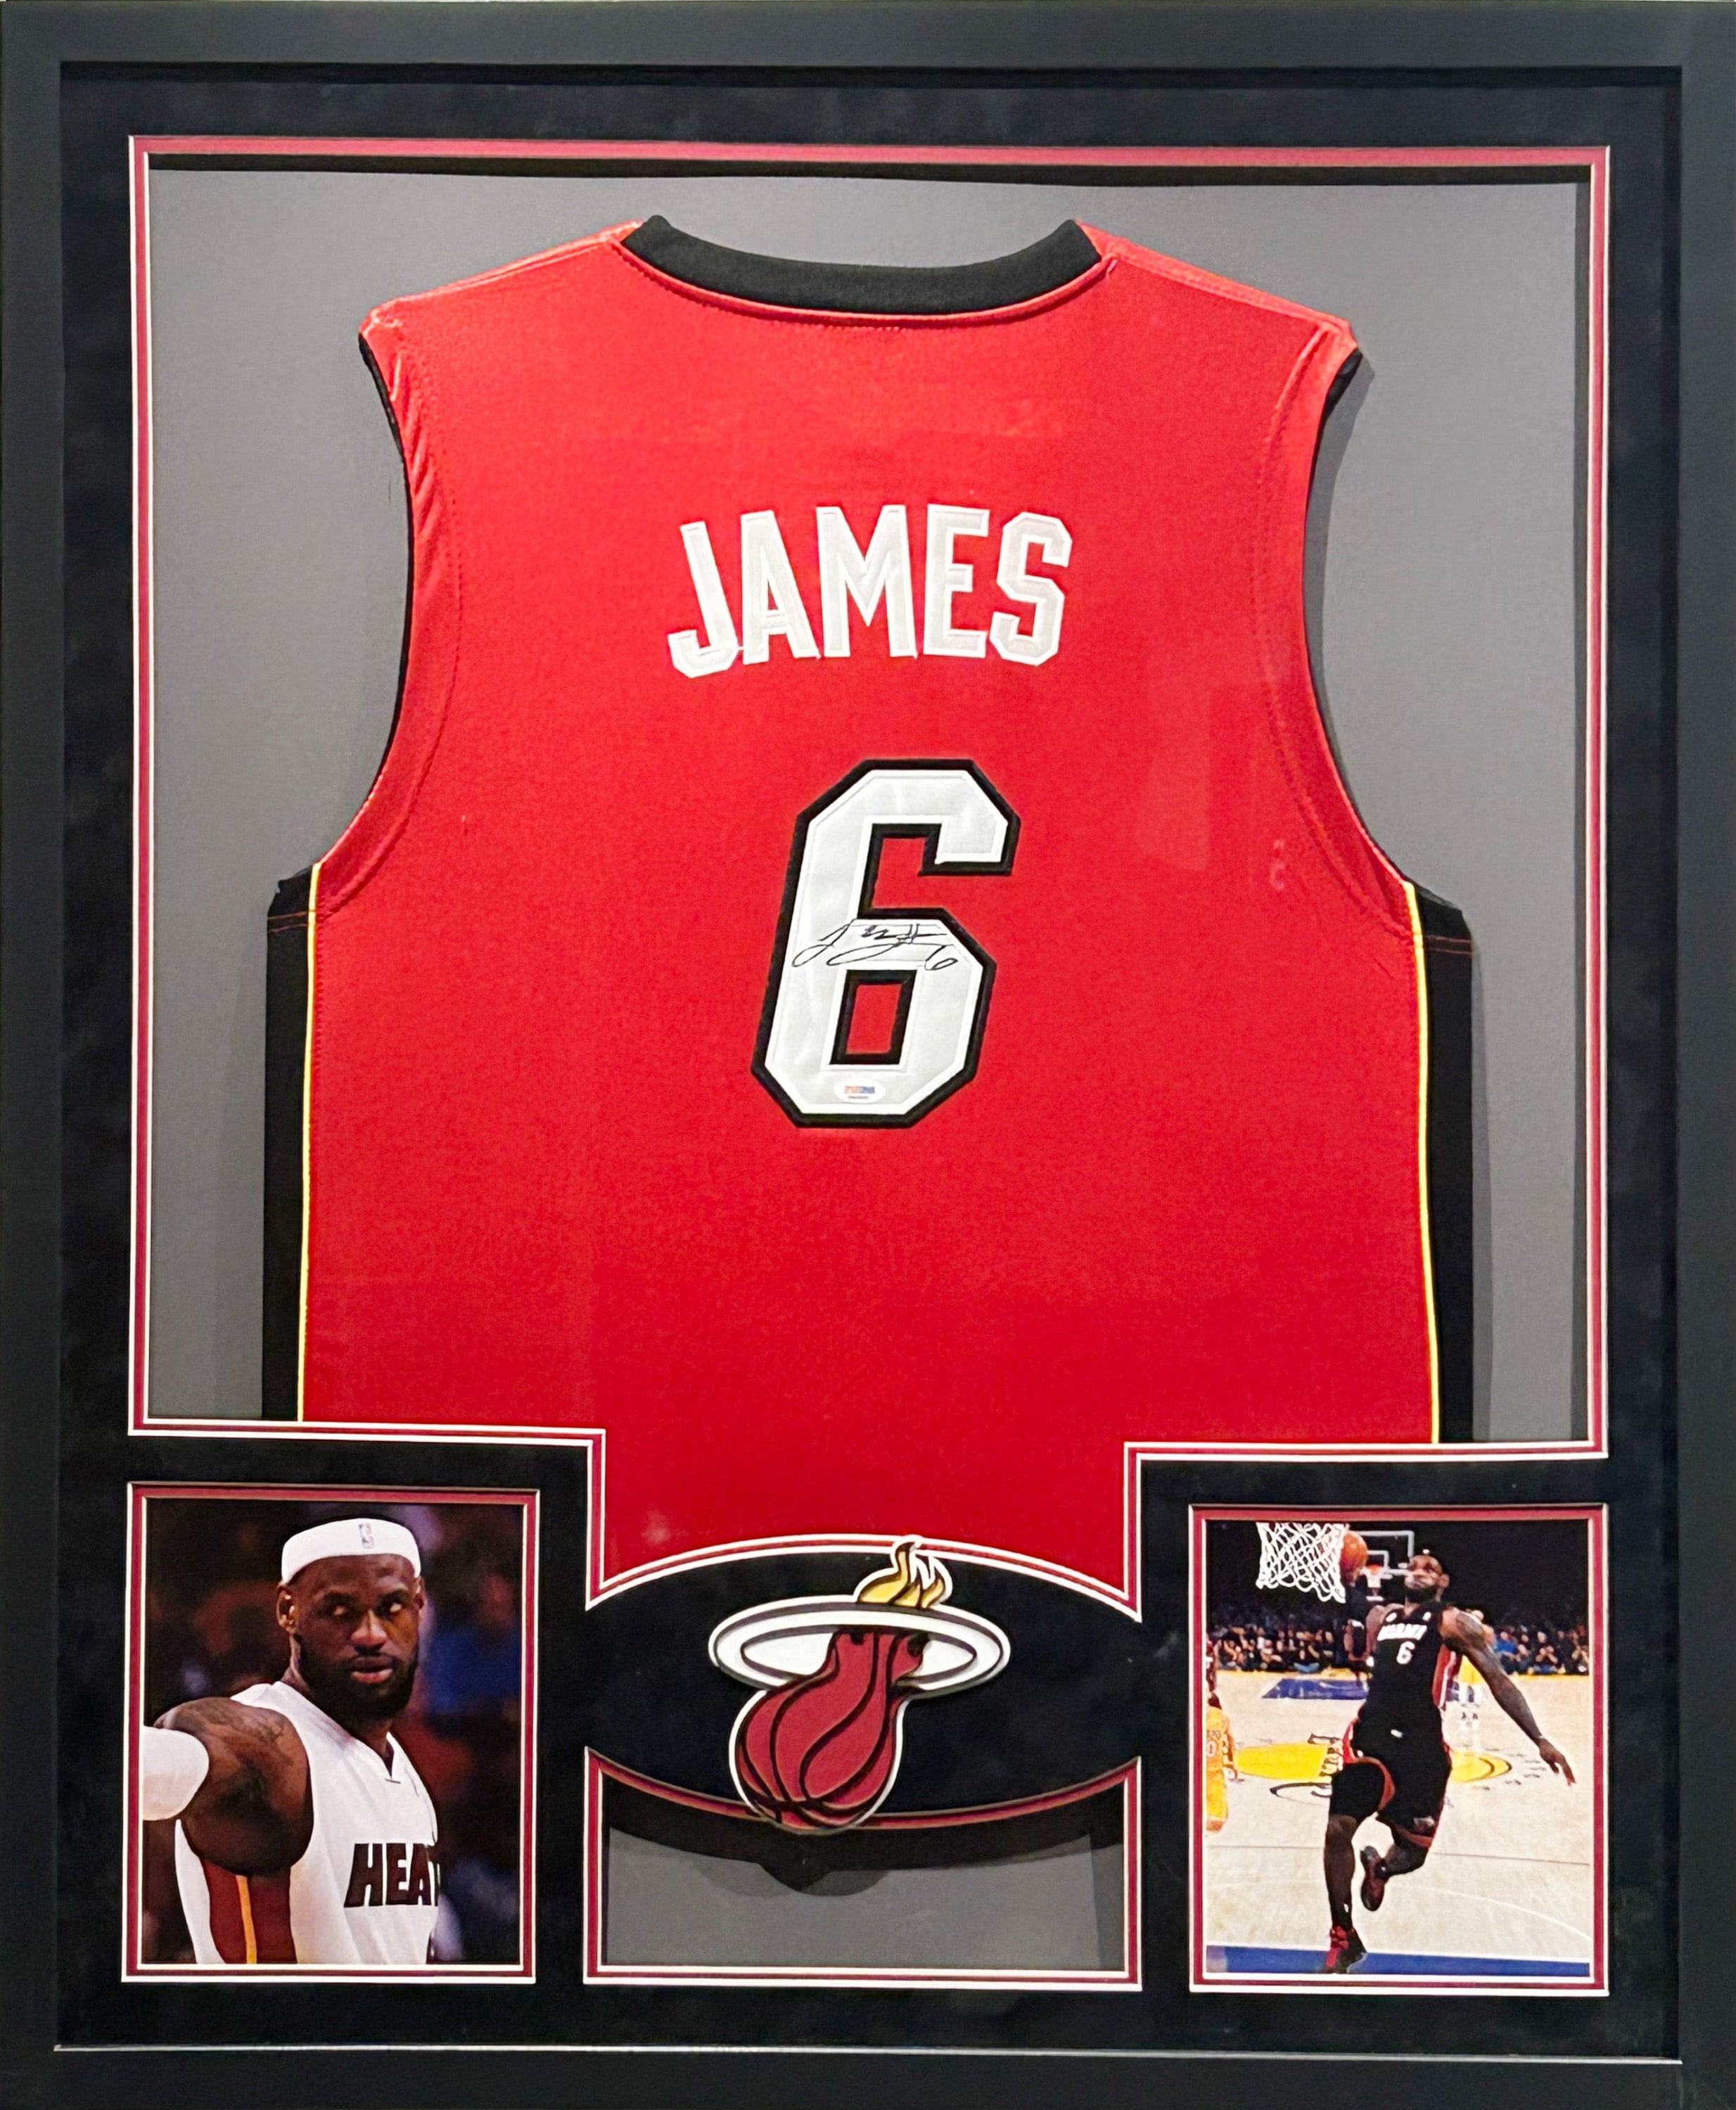 miami heat jersey with your name